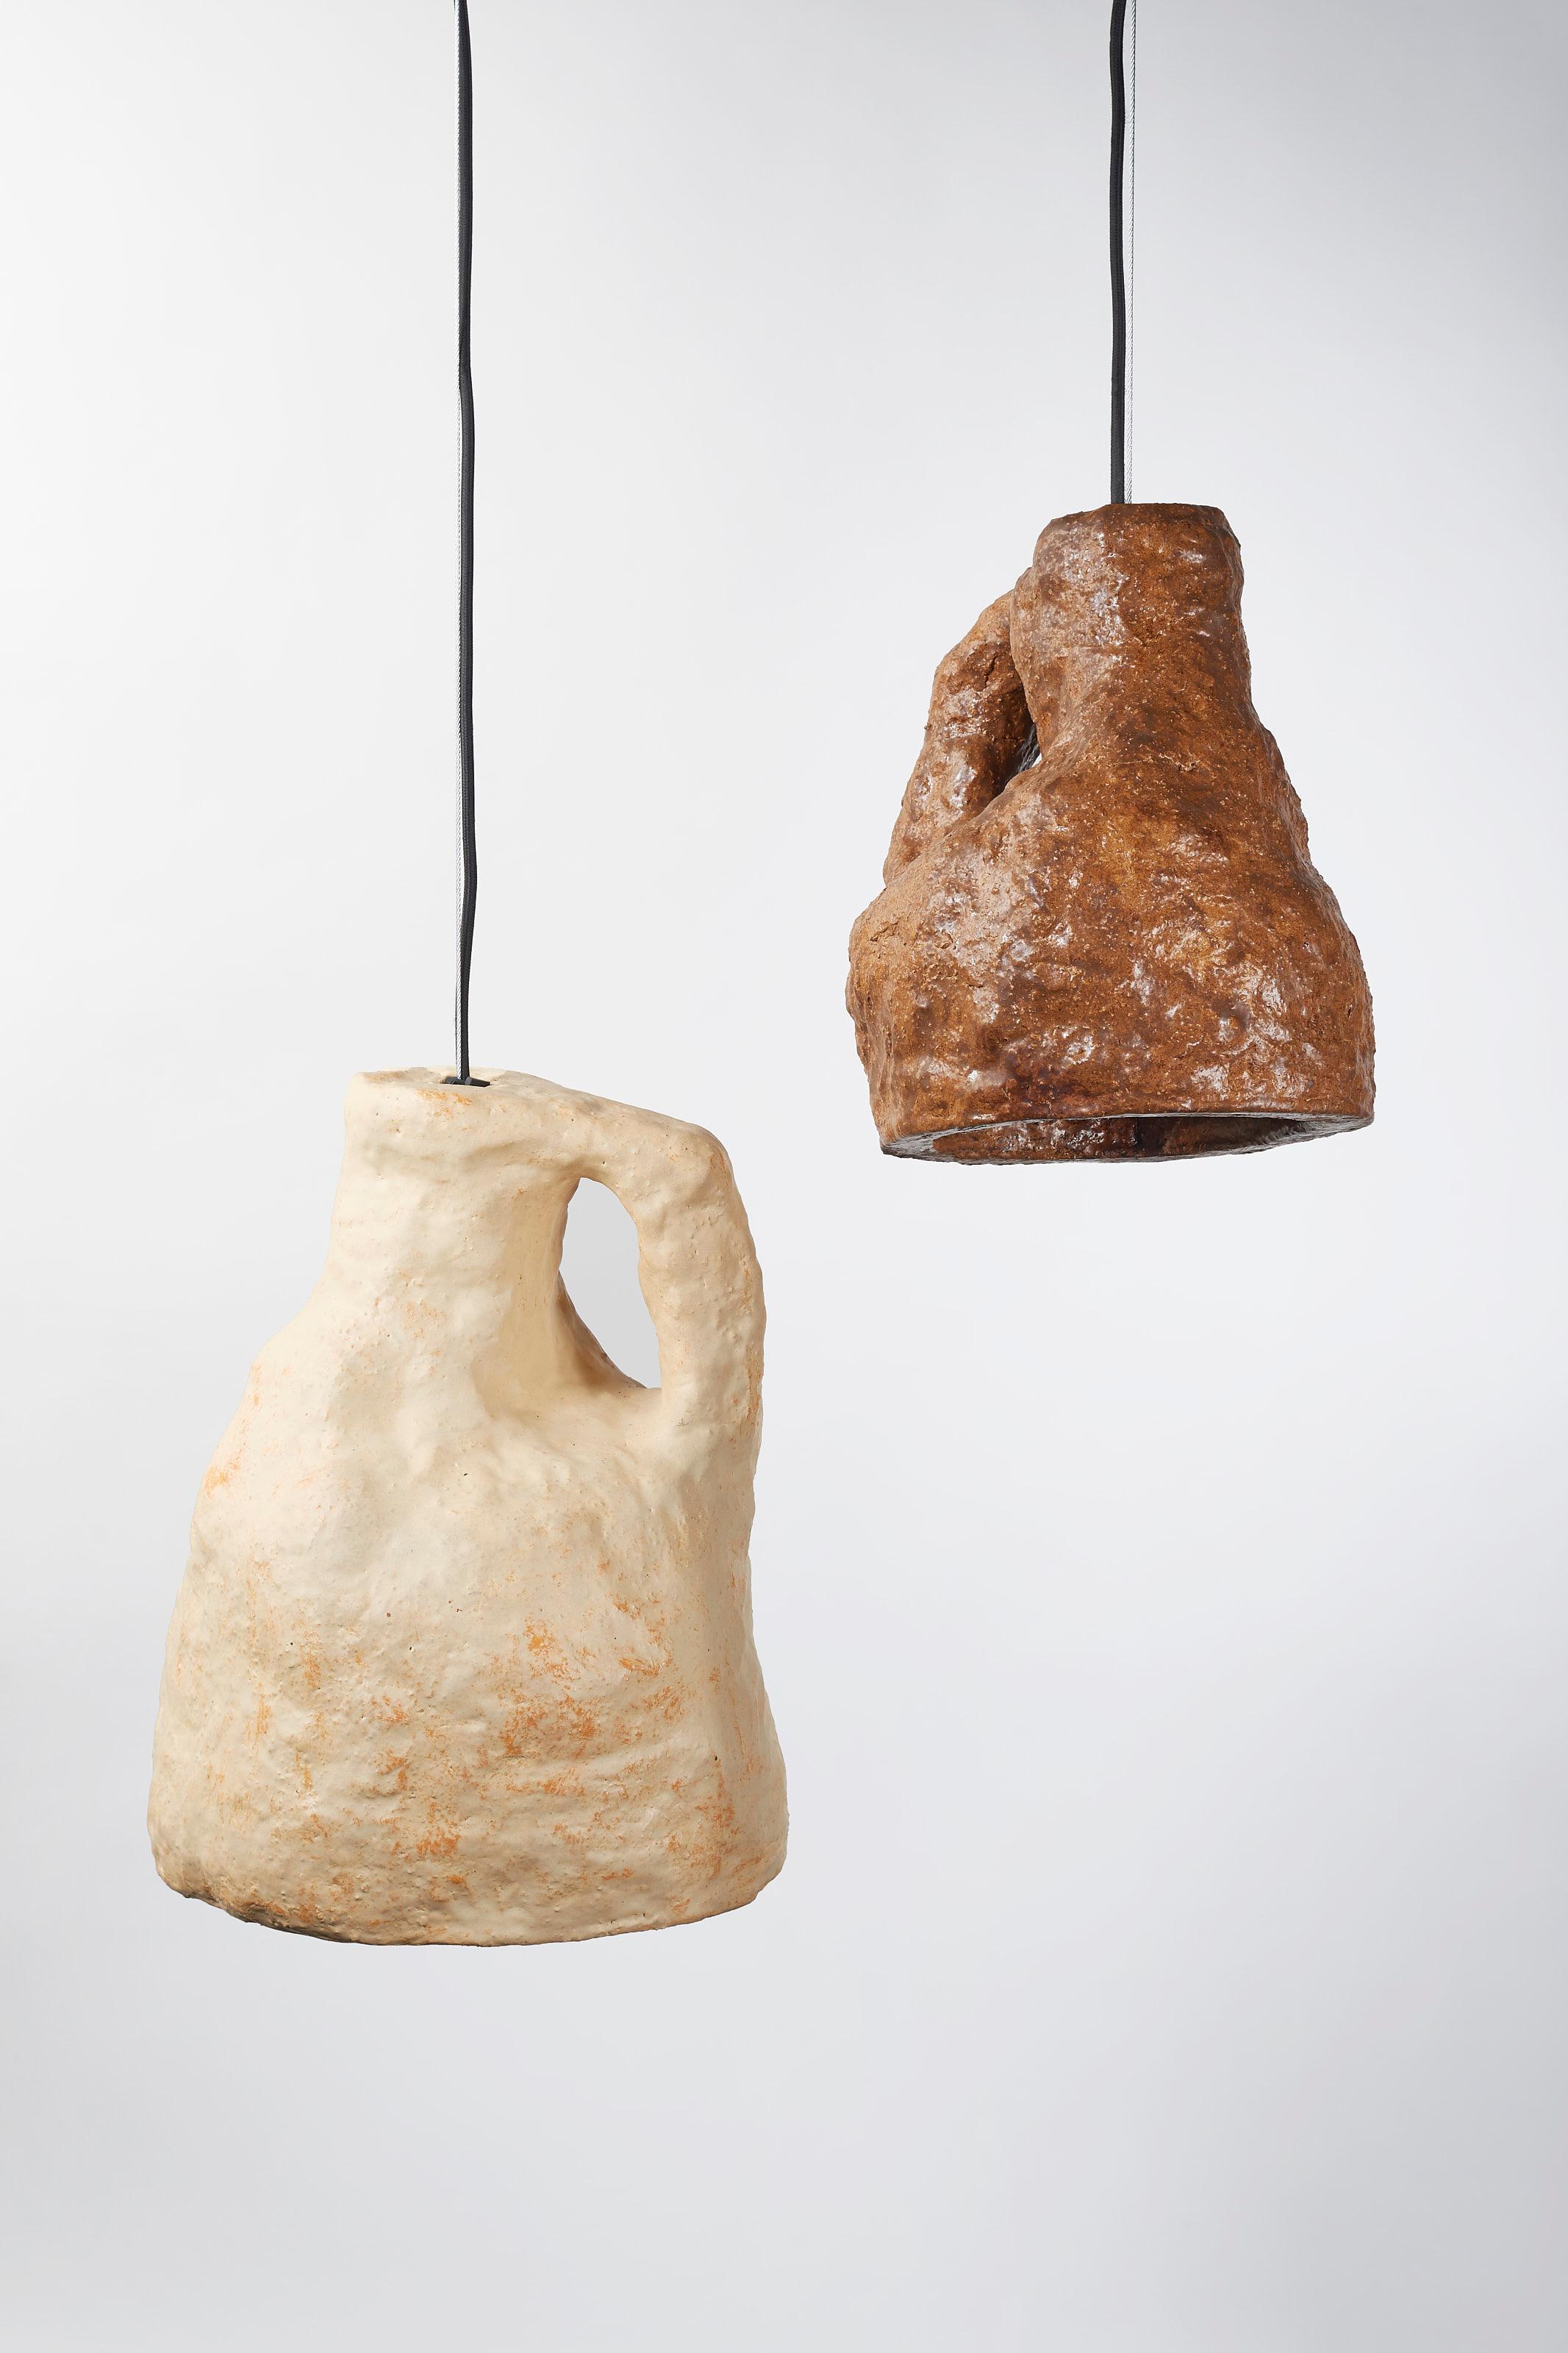 Set of 2 Dual Lamps by Willem Van Hooff
Dimensions: W 25 x H 30 cm // W 35 x H 50 cm (Dimensions may vary as pieces are hand-made and might present slight variations in sizes)
Materials: Earthenware, ceramic, pigments and glaze
Also available in